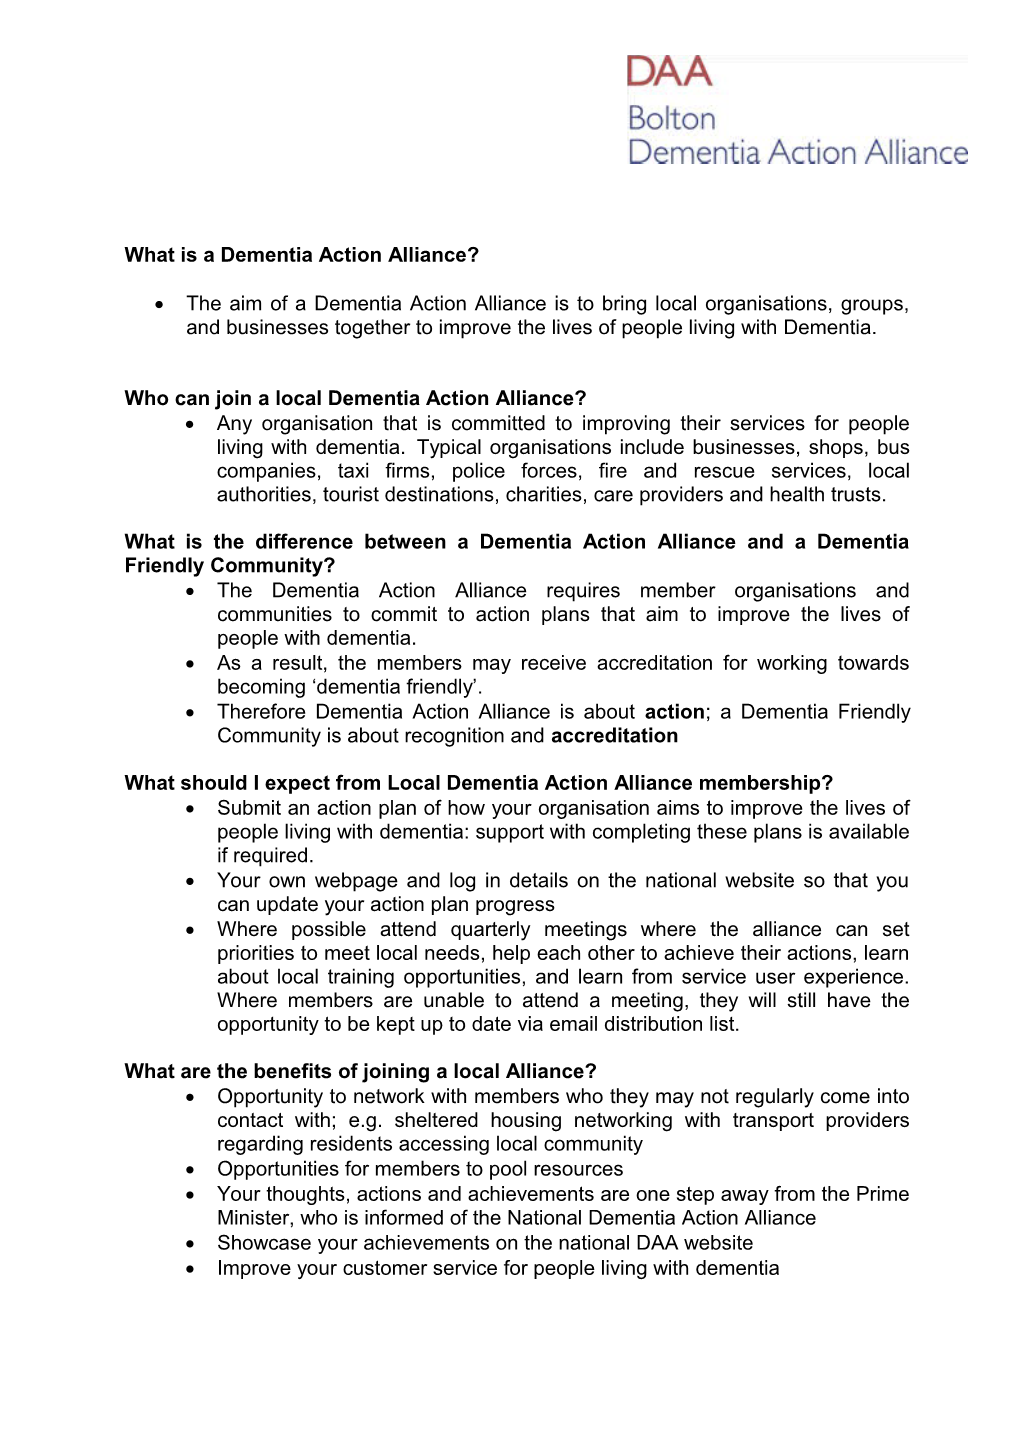 Internal Briefing Note: What Is a Dementia Action Alliance